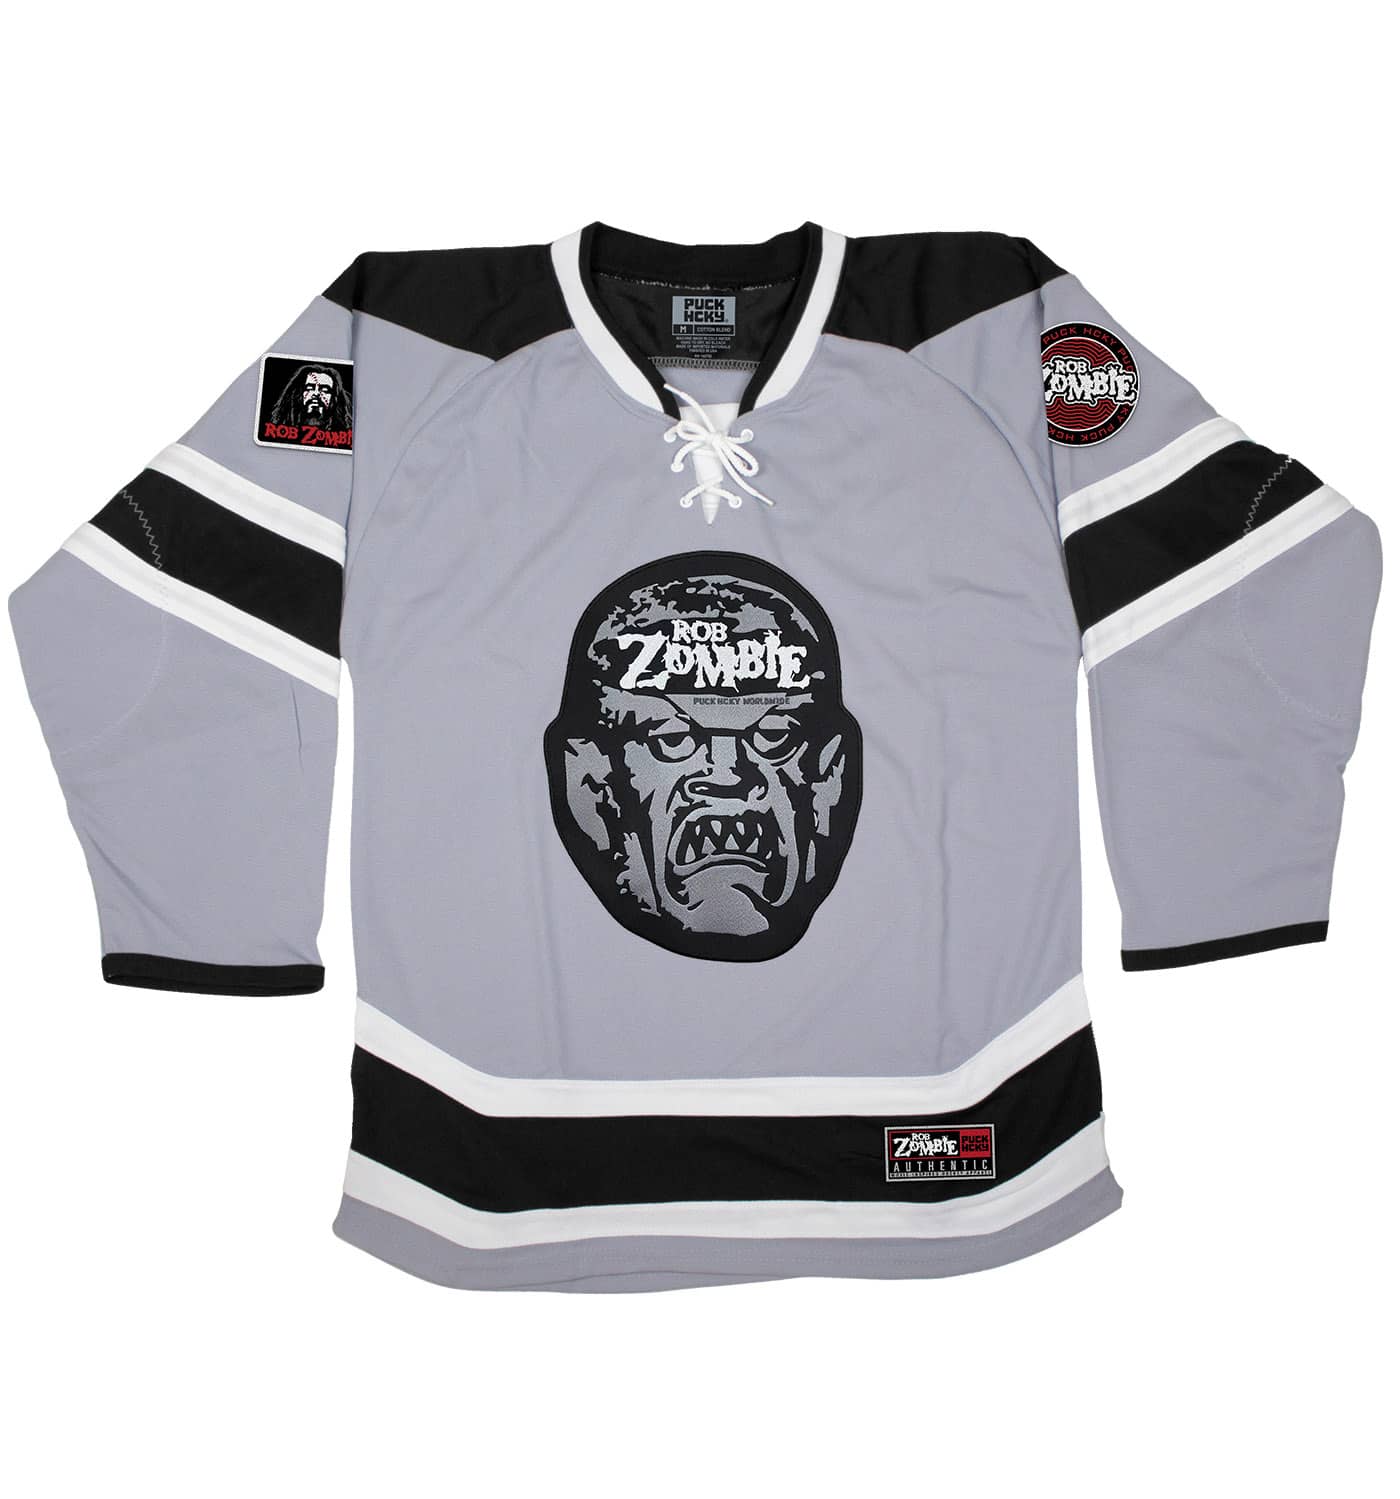 ROB ZOMBIE 'SKATERBEAST' deluxe hockey jersey in grey, black, and white front view